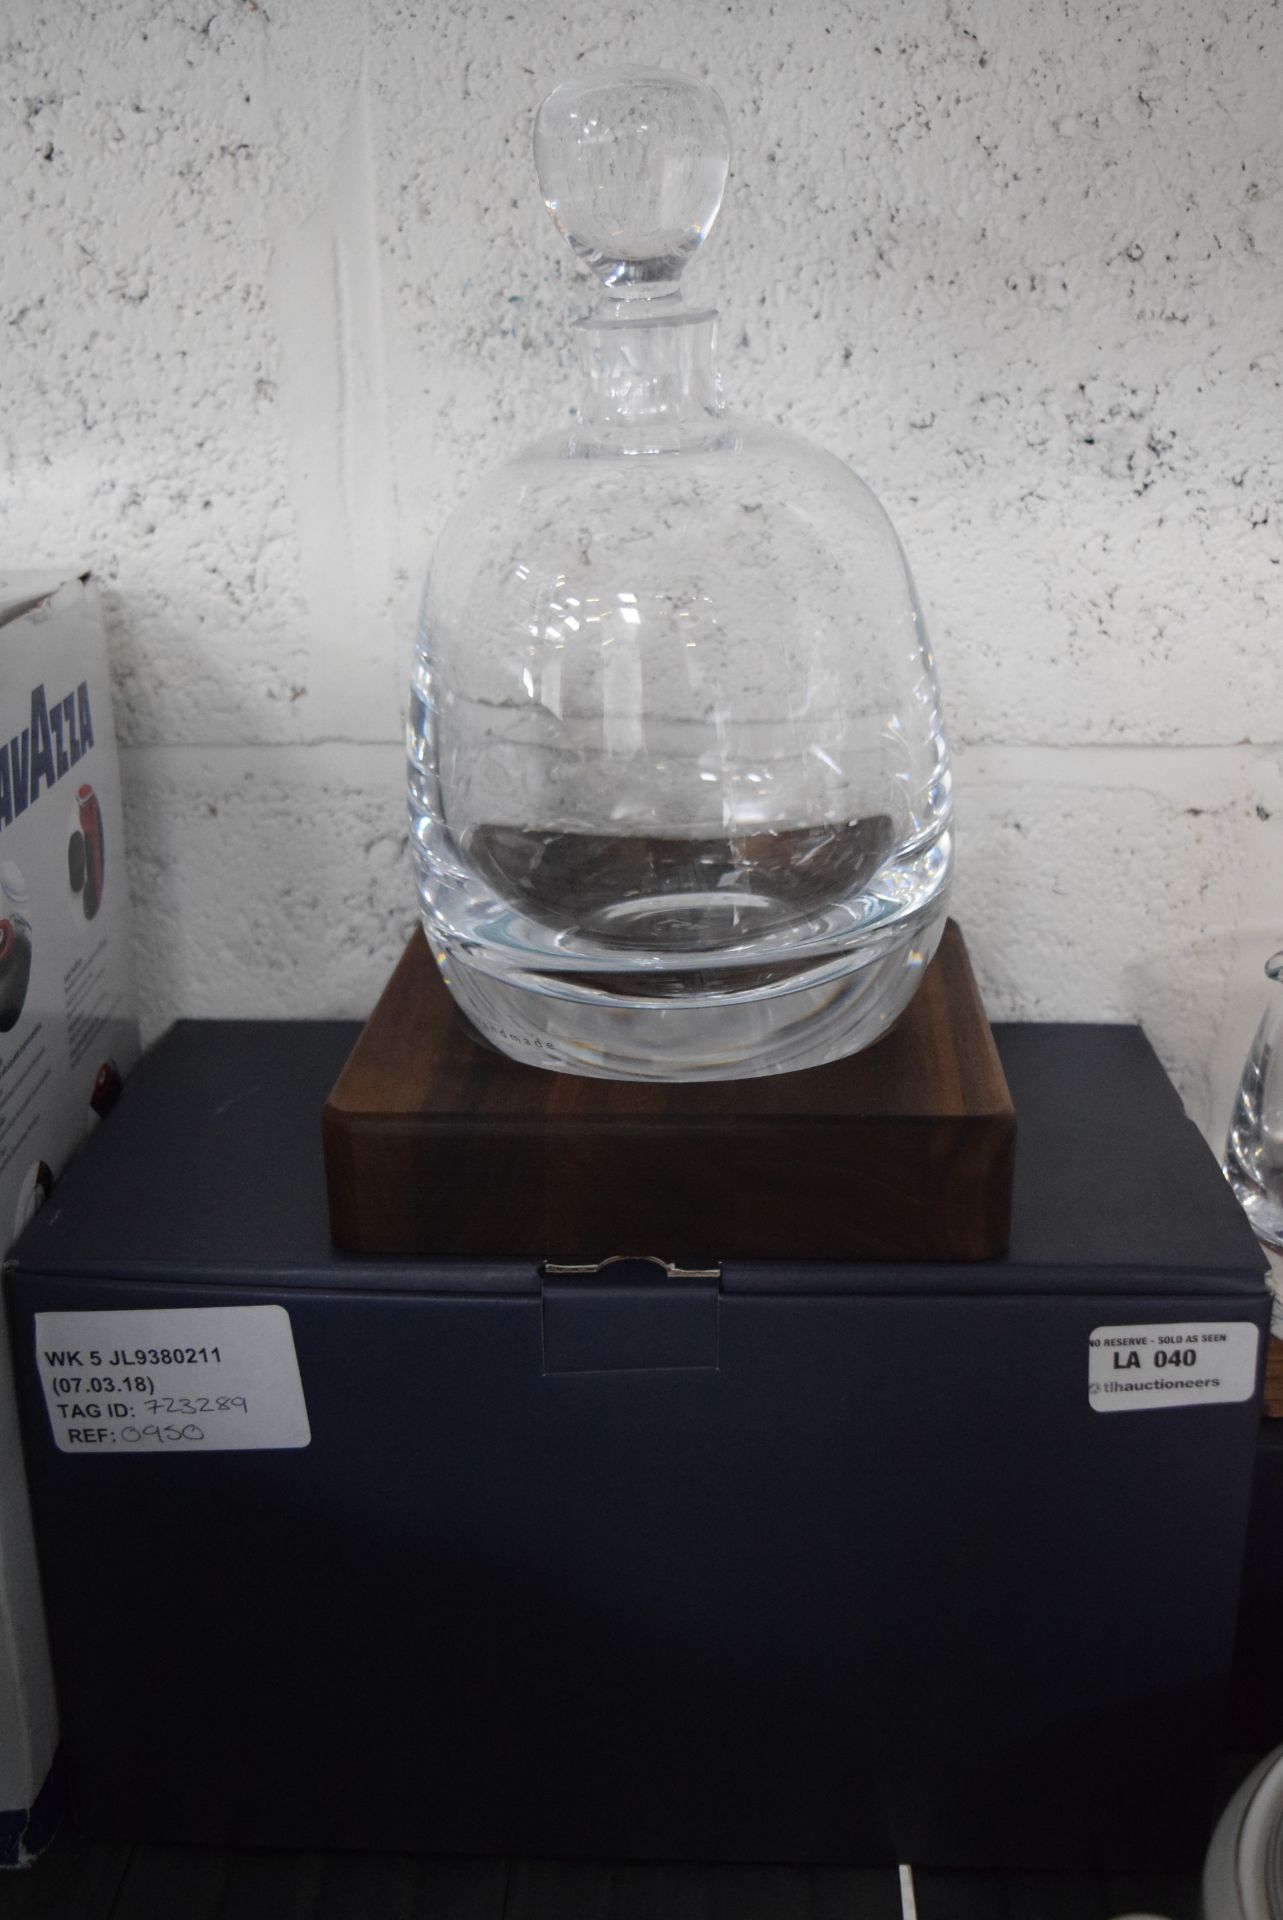 1 x BOXED LSA WHISKY DECANTER RRP £95 07.03.18 723289 *PLEASE NOTE THAT THE BID PRICE IS